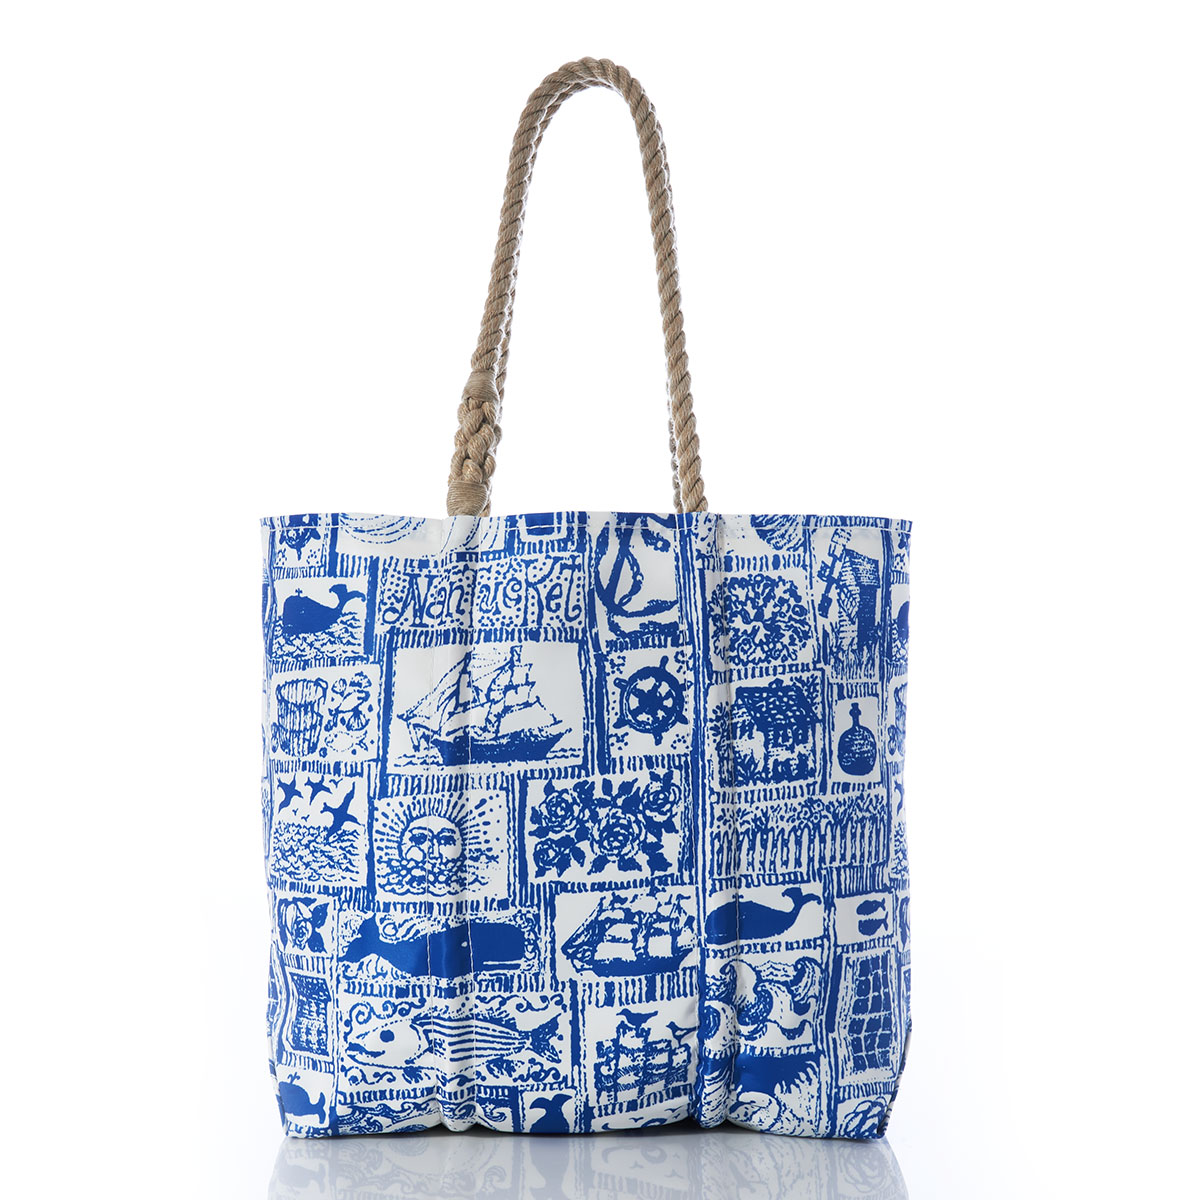 blue squares filled with various nautical imagery printed on recycled sail cloth medium tote with hemp rope handles